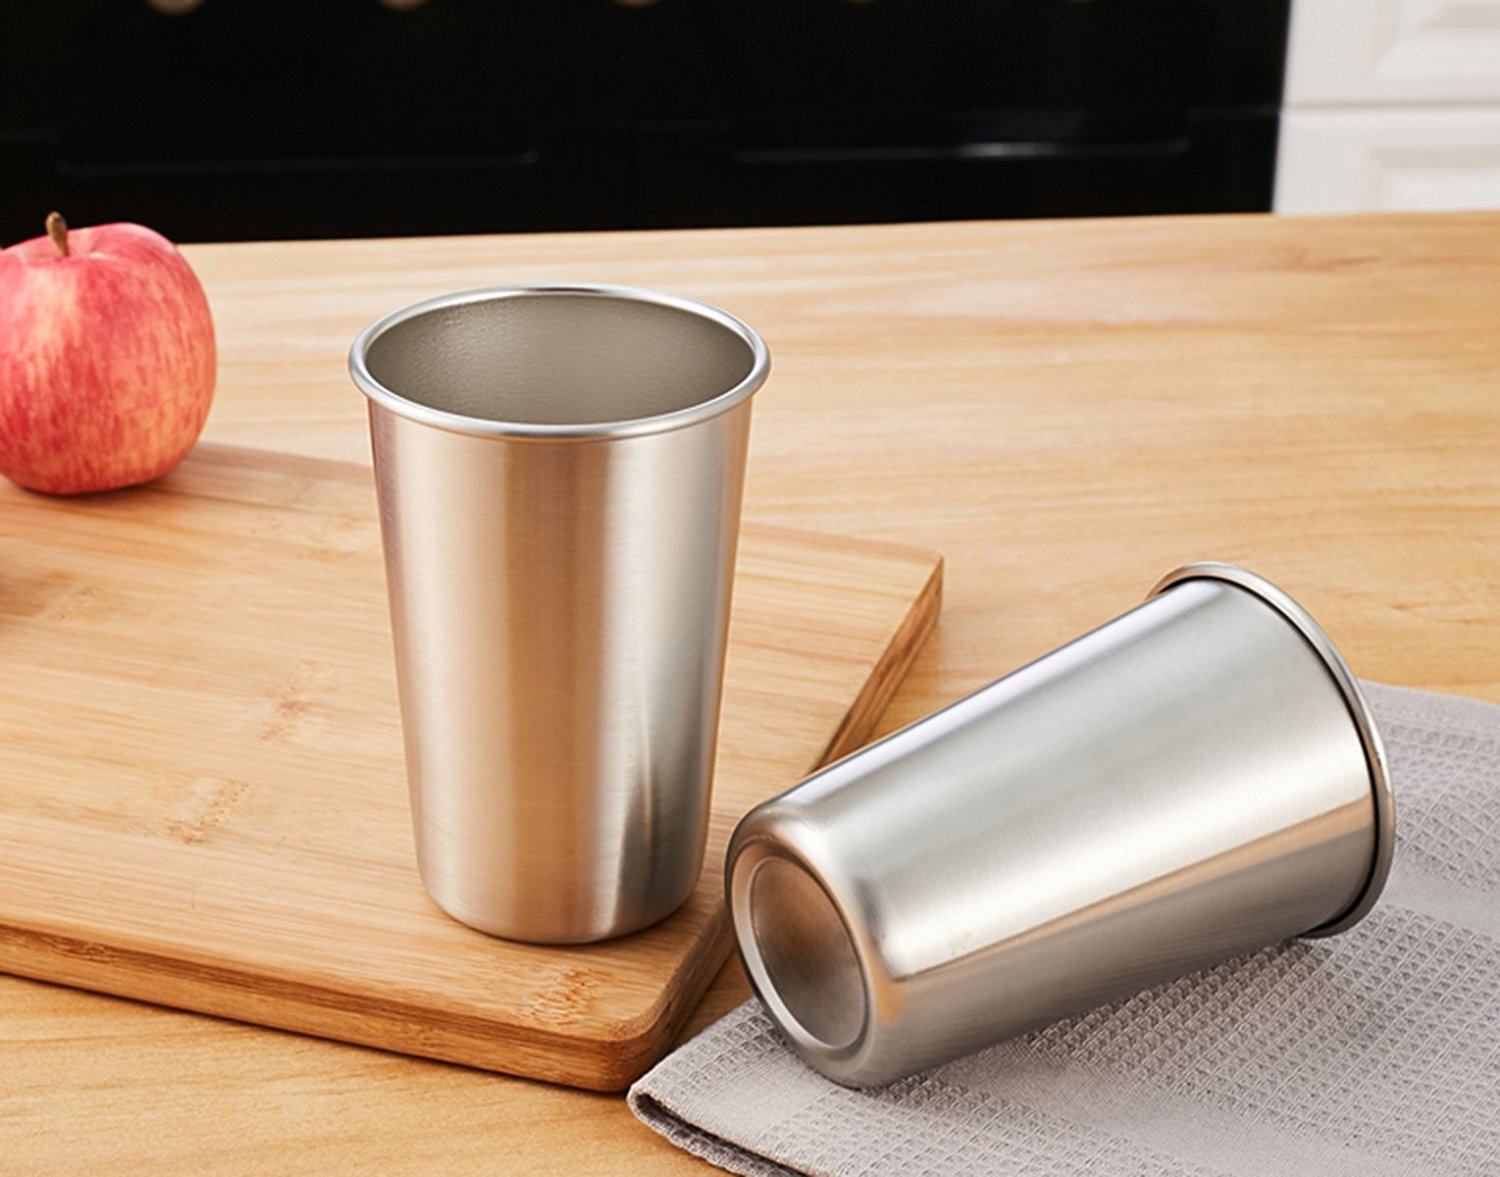 Stainless steel beer mug cold can|16oz